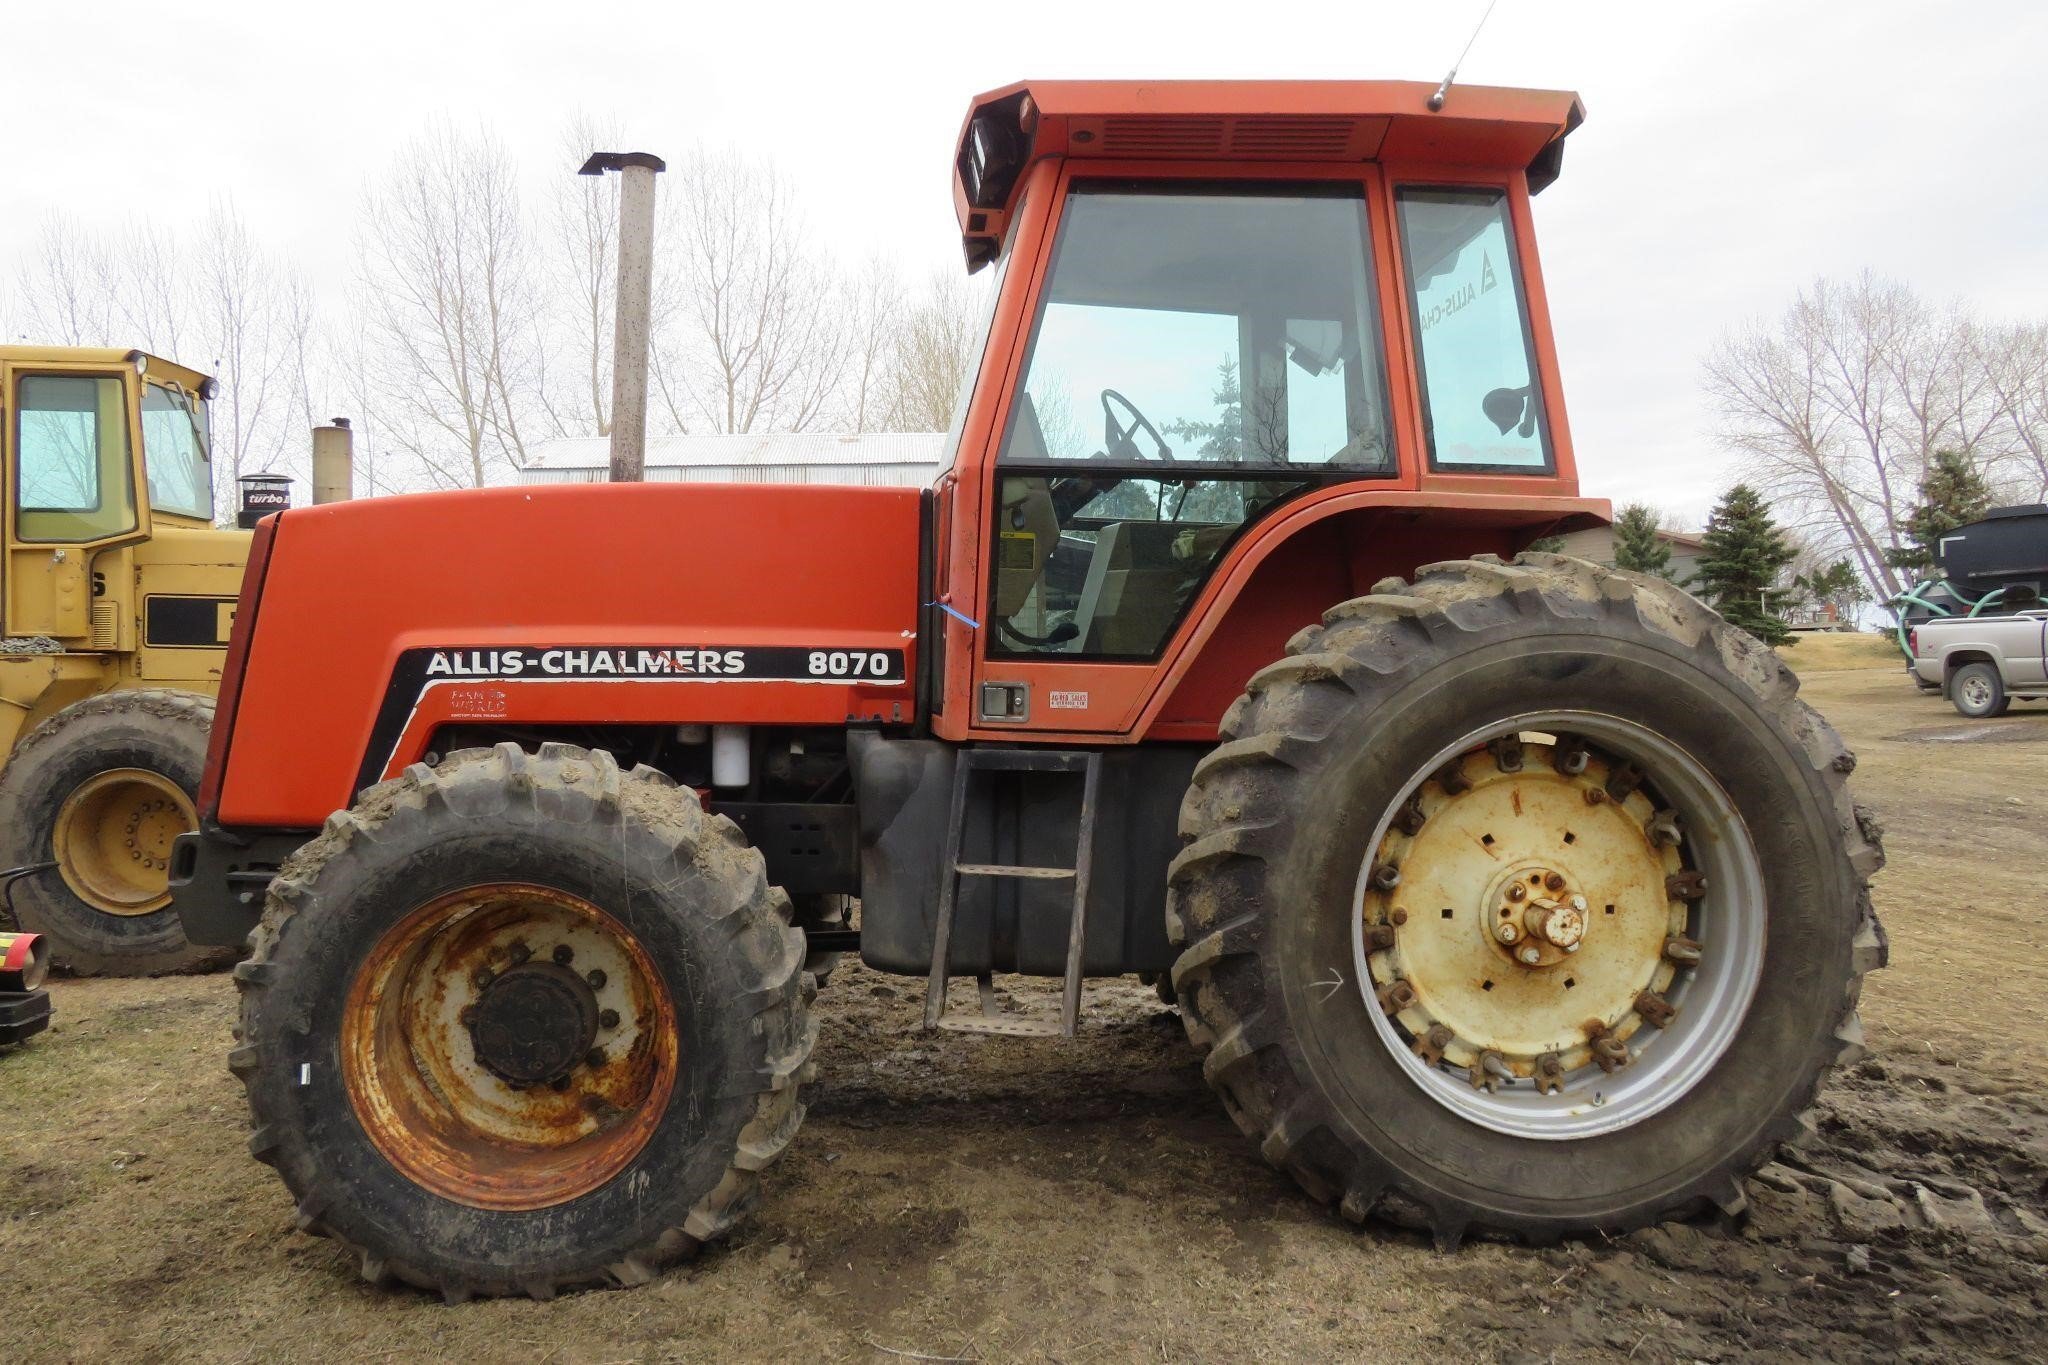 ALLIS CHALMERS 8070 POWERSHIFT TRACTOR